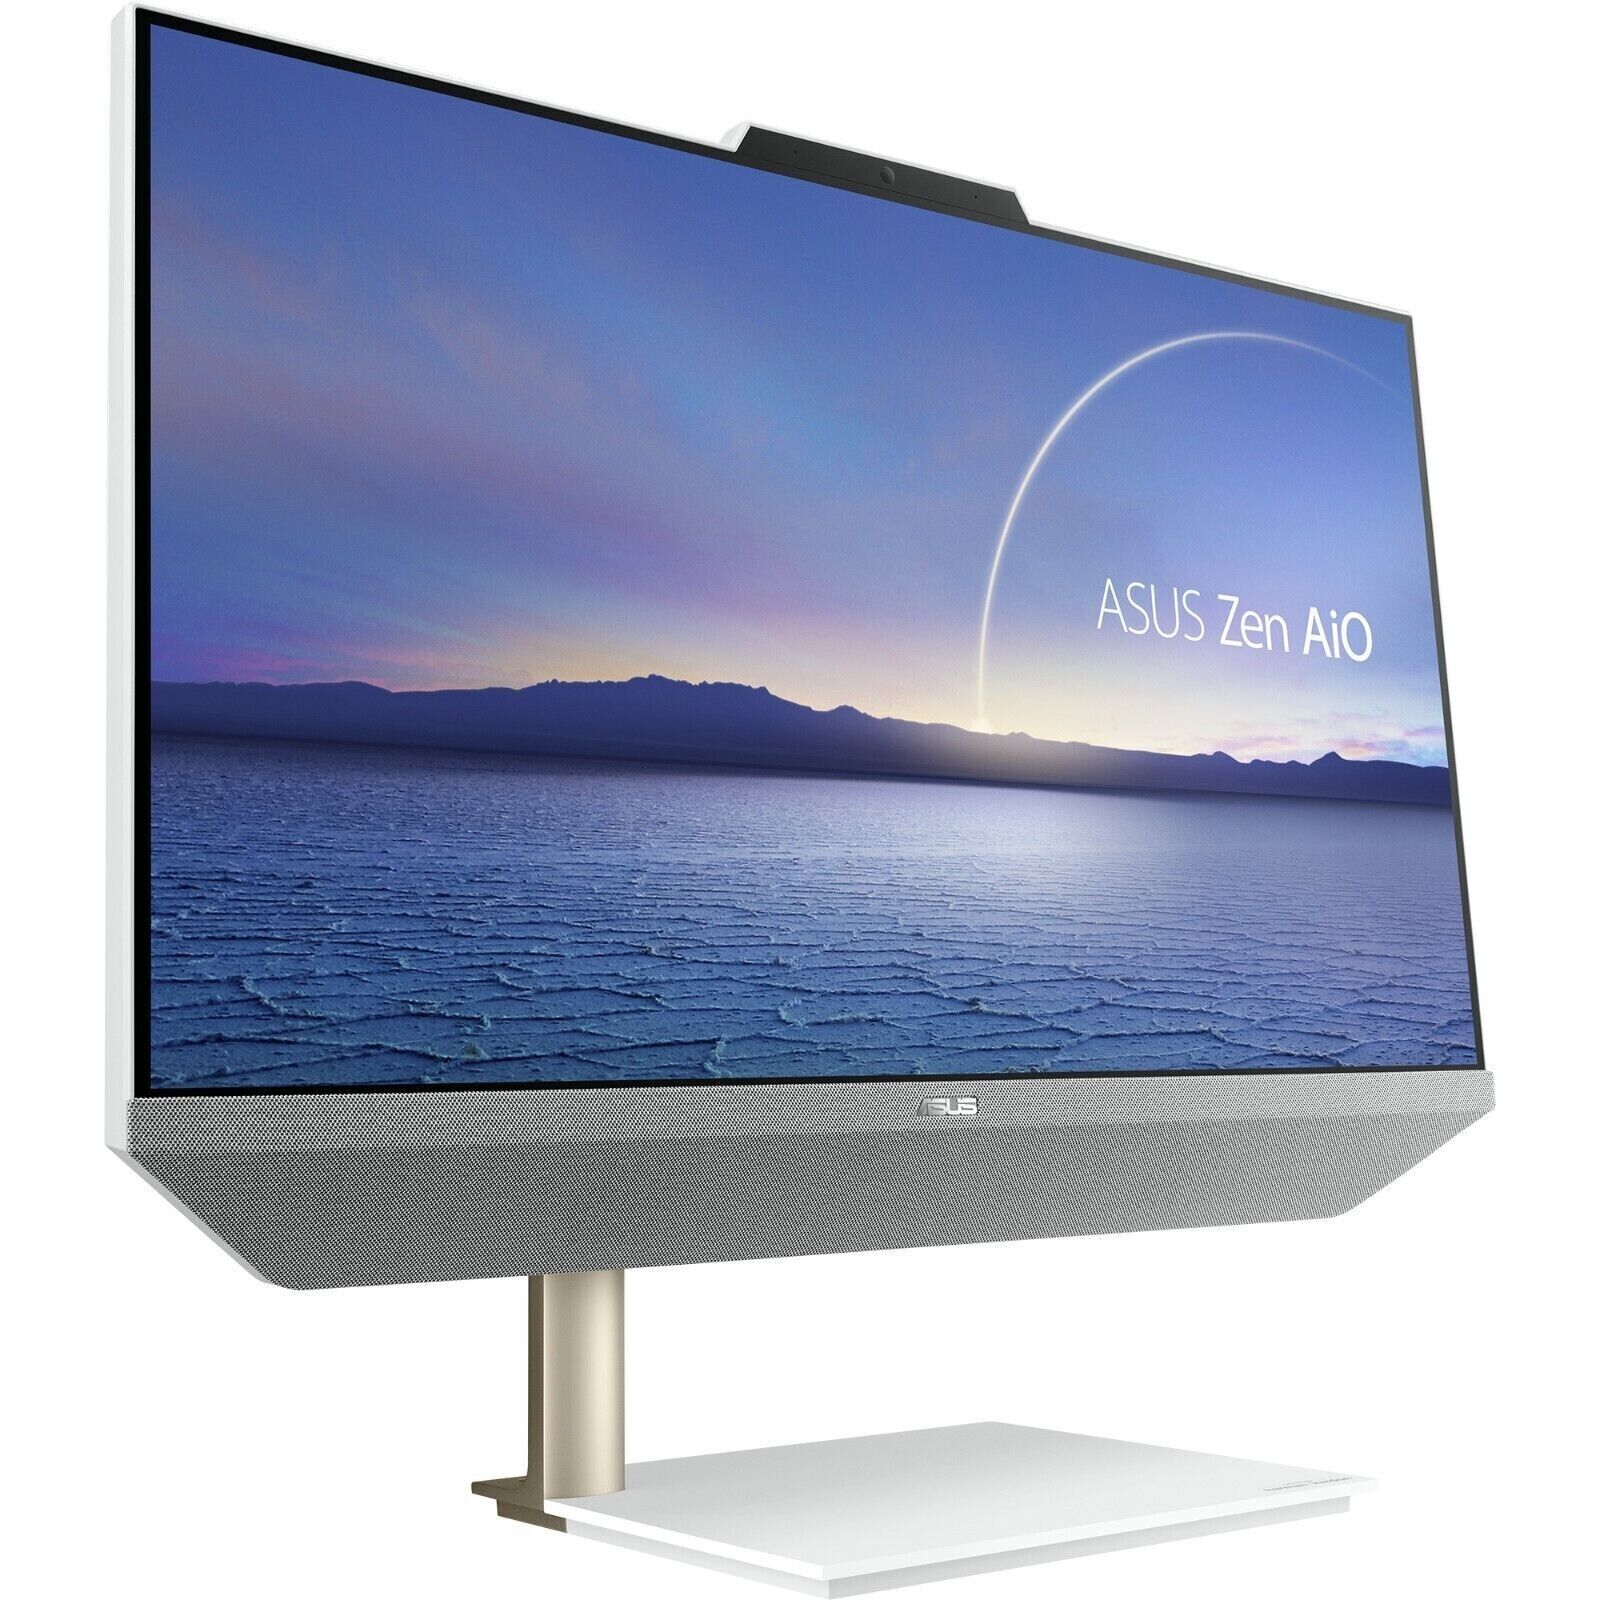 ASUS Zen AiO 24 All-in-One PC 23.8